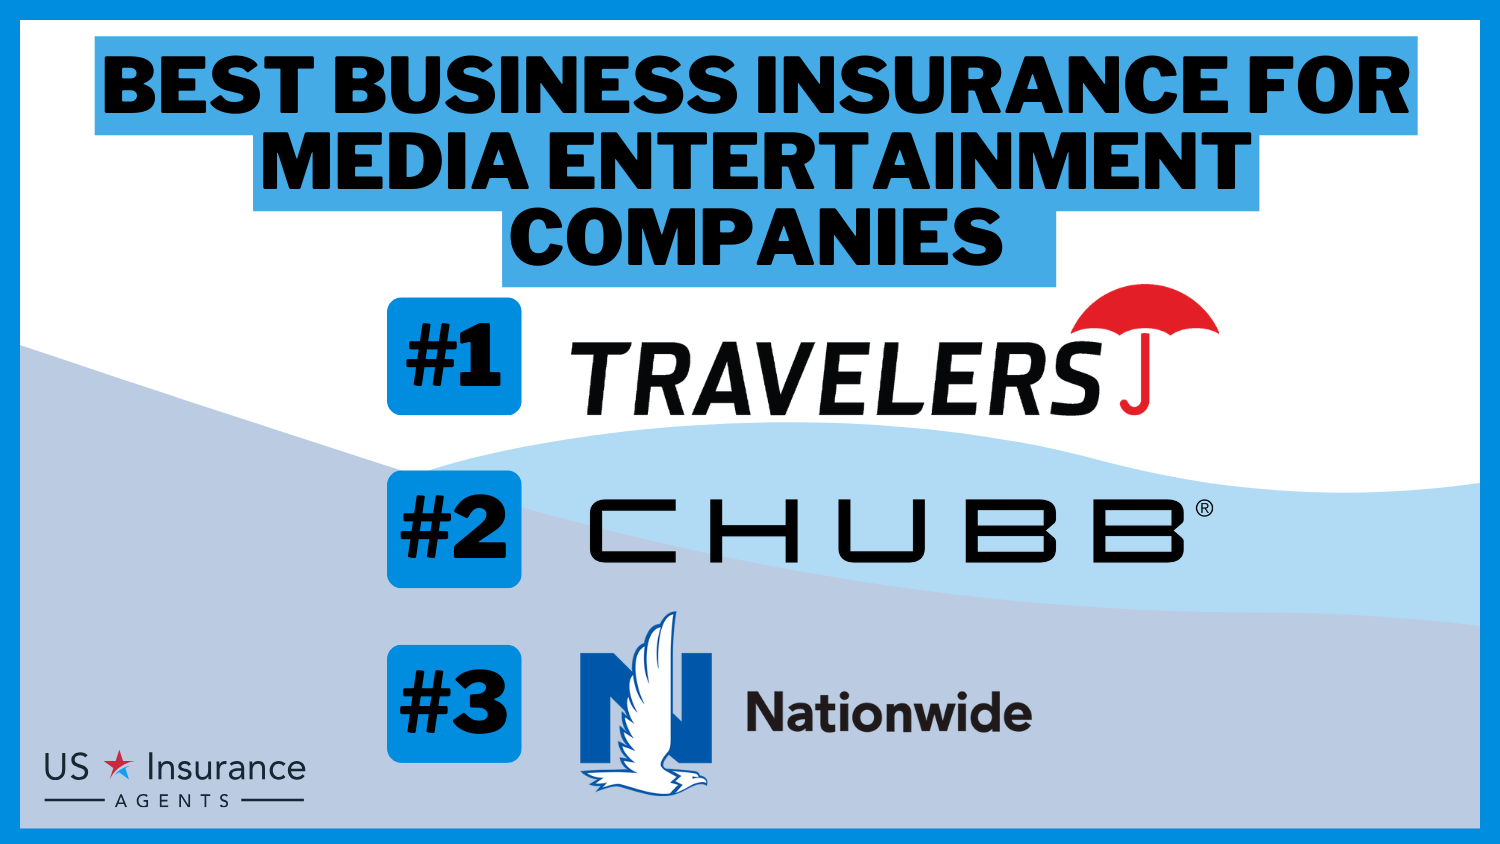 3 Best Business Insurance for Media Entertainment Companies: Travelers, Chubb and Nationwide.